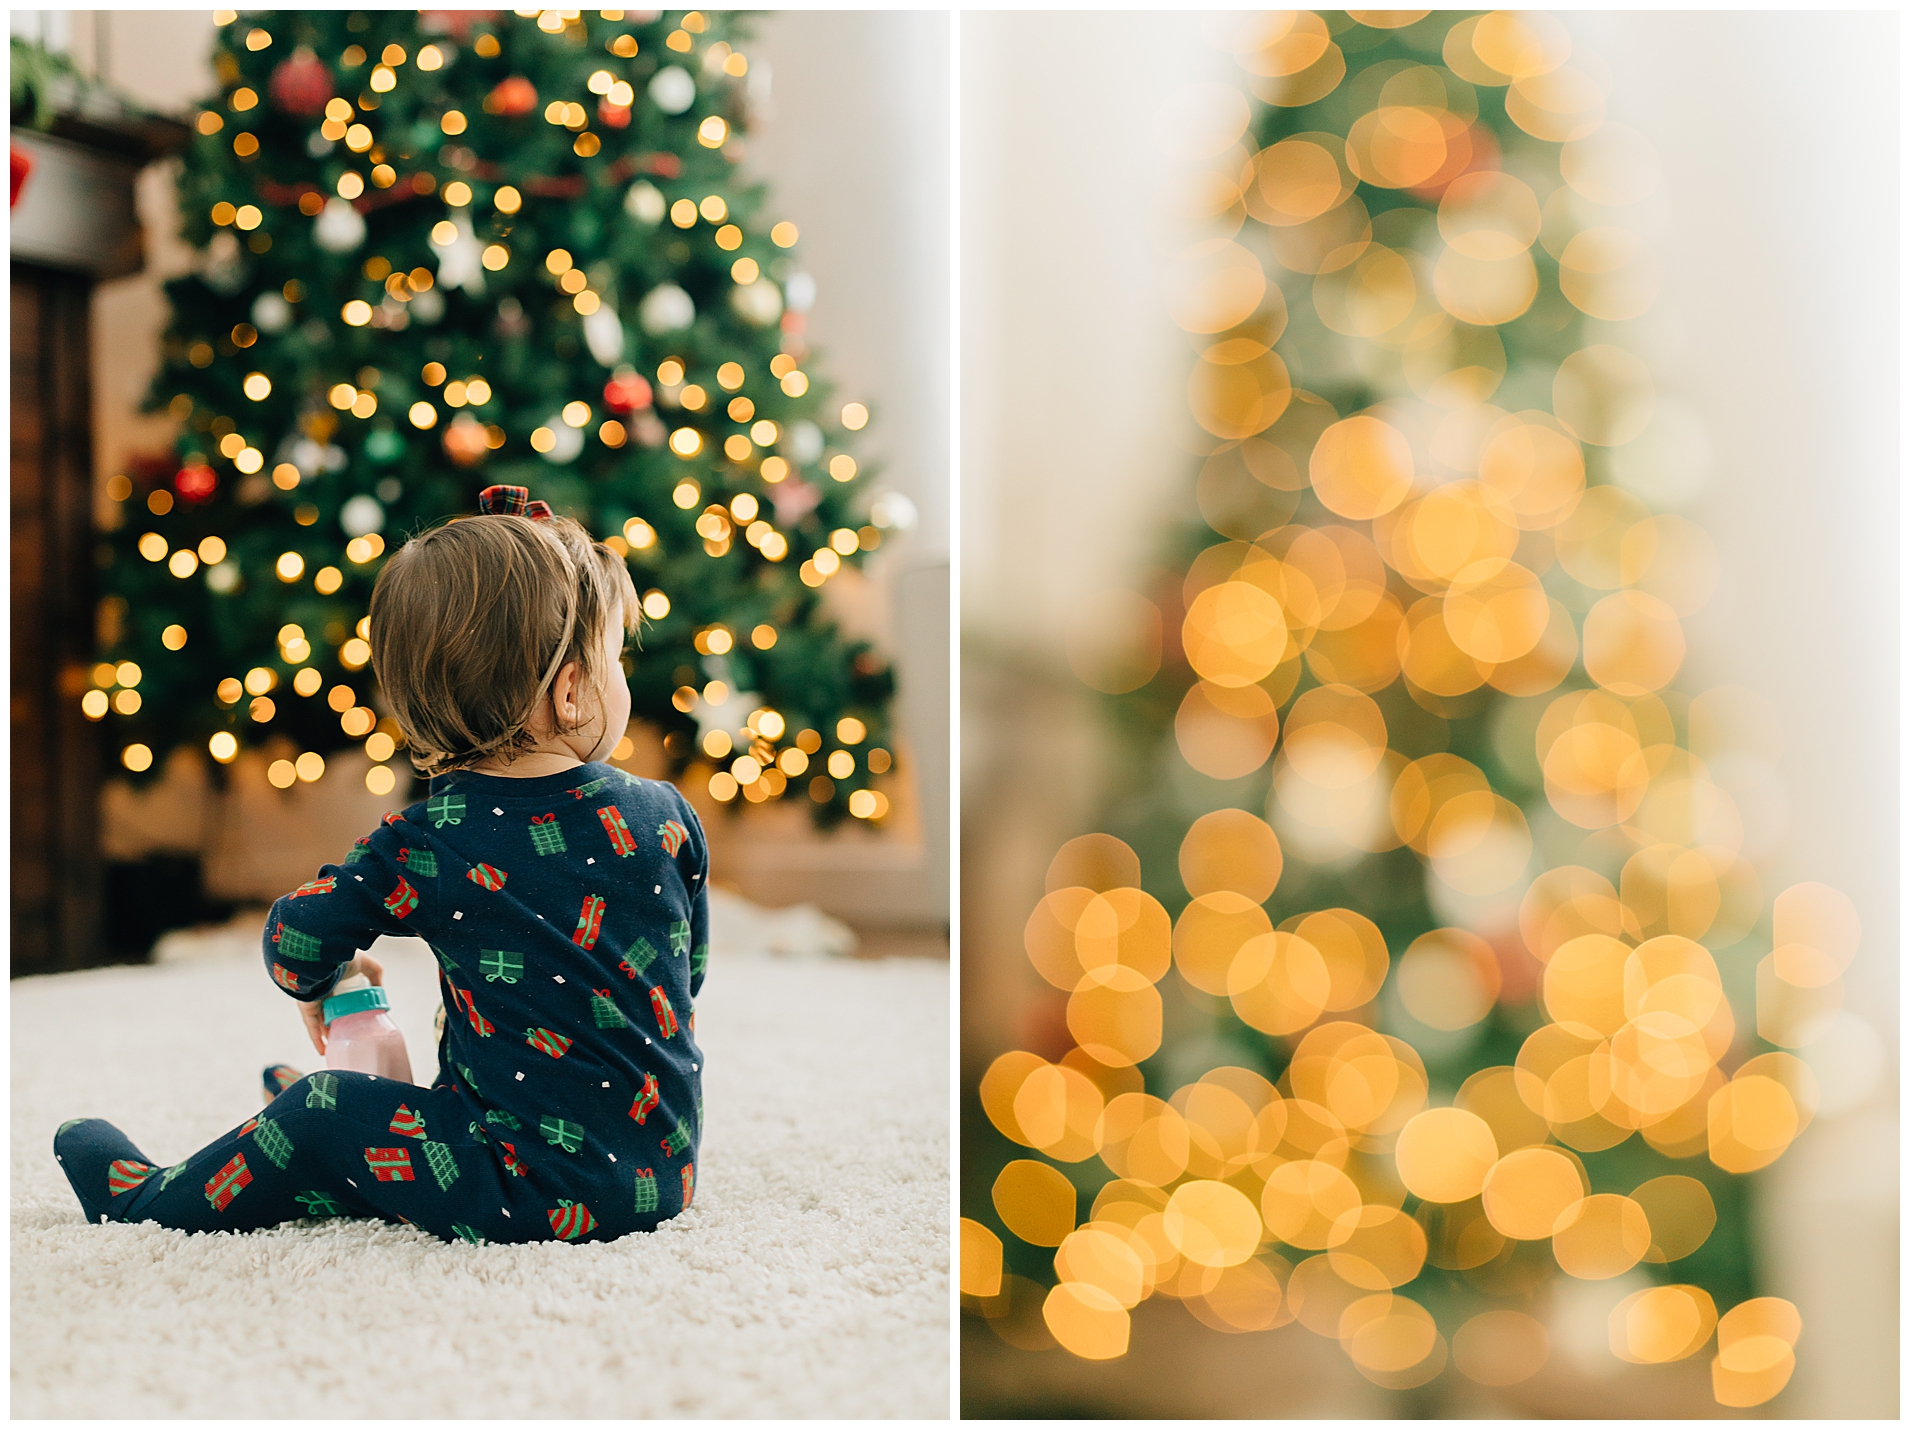 How to Blur Christmas Lights in Background | Utah Photographer | Truly Photography